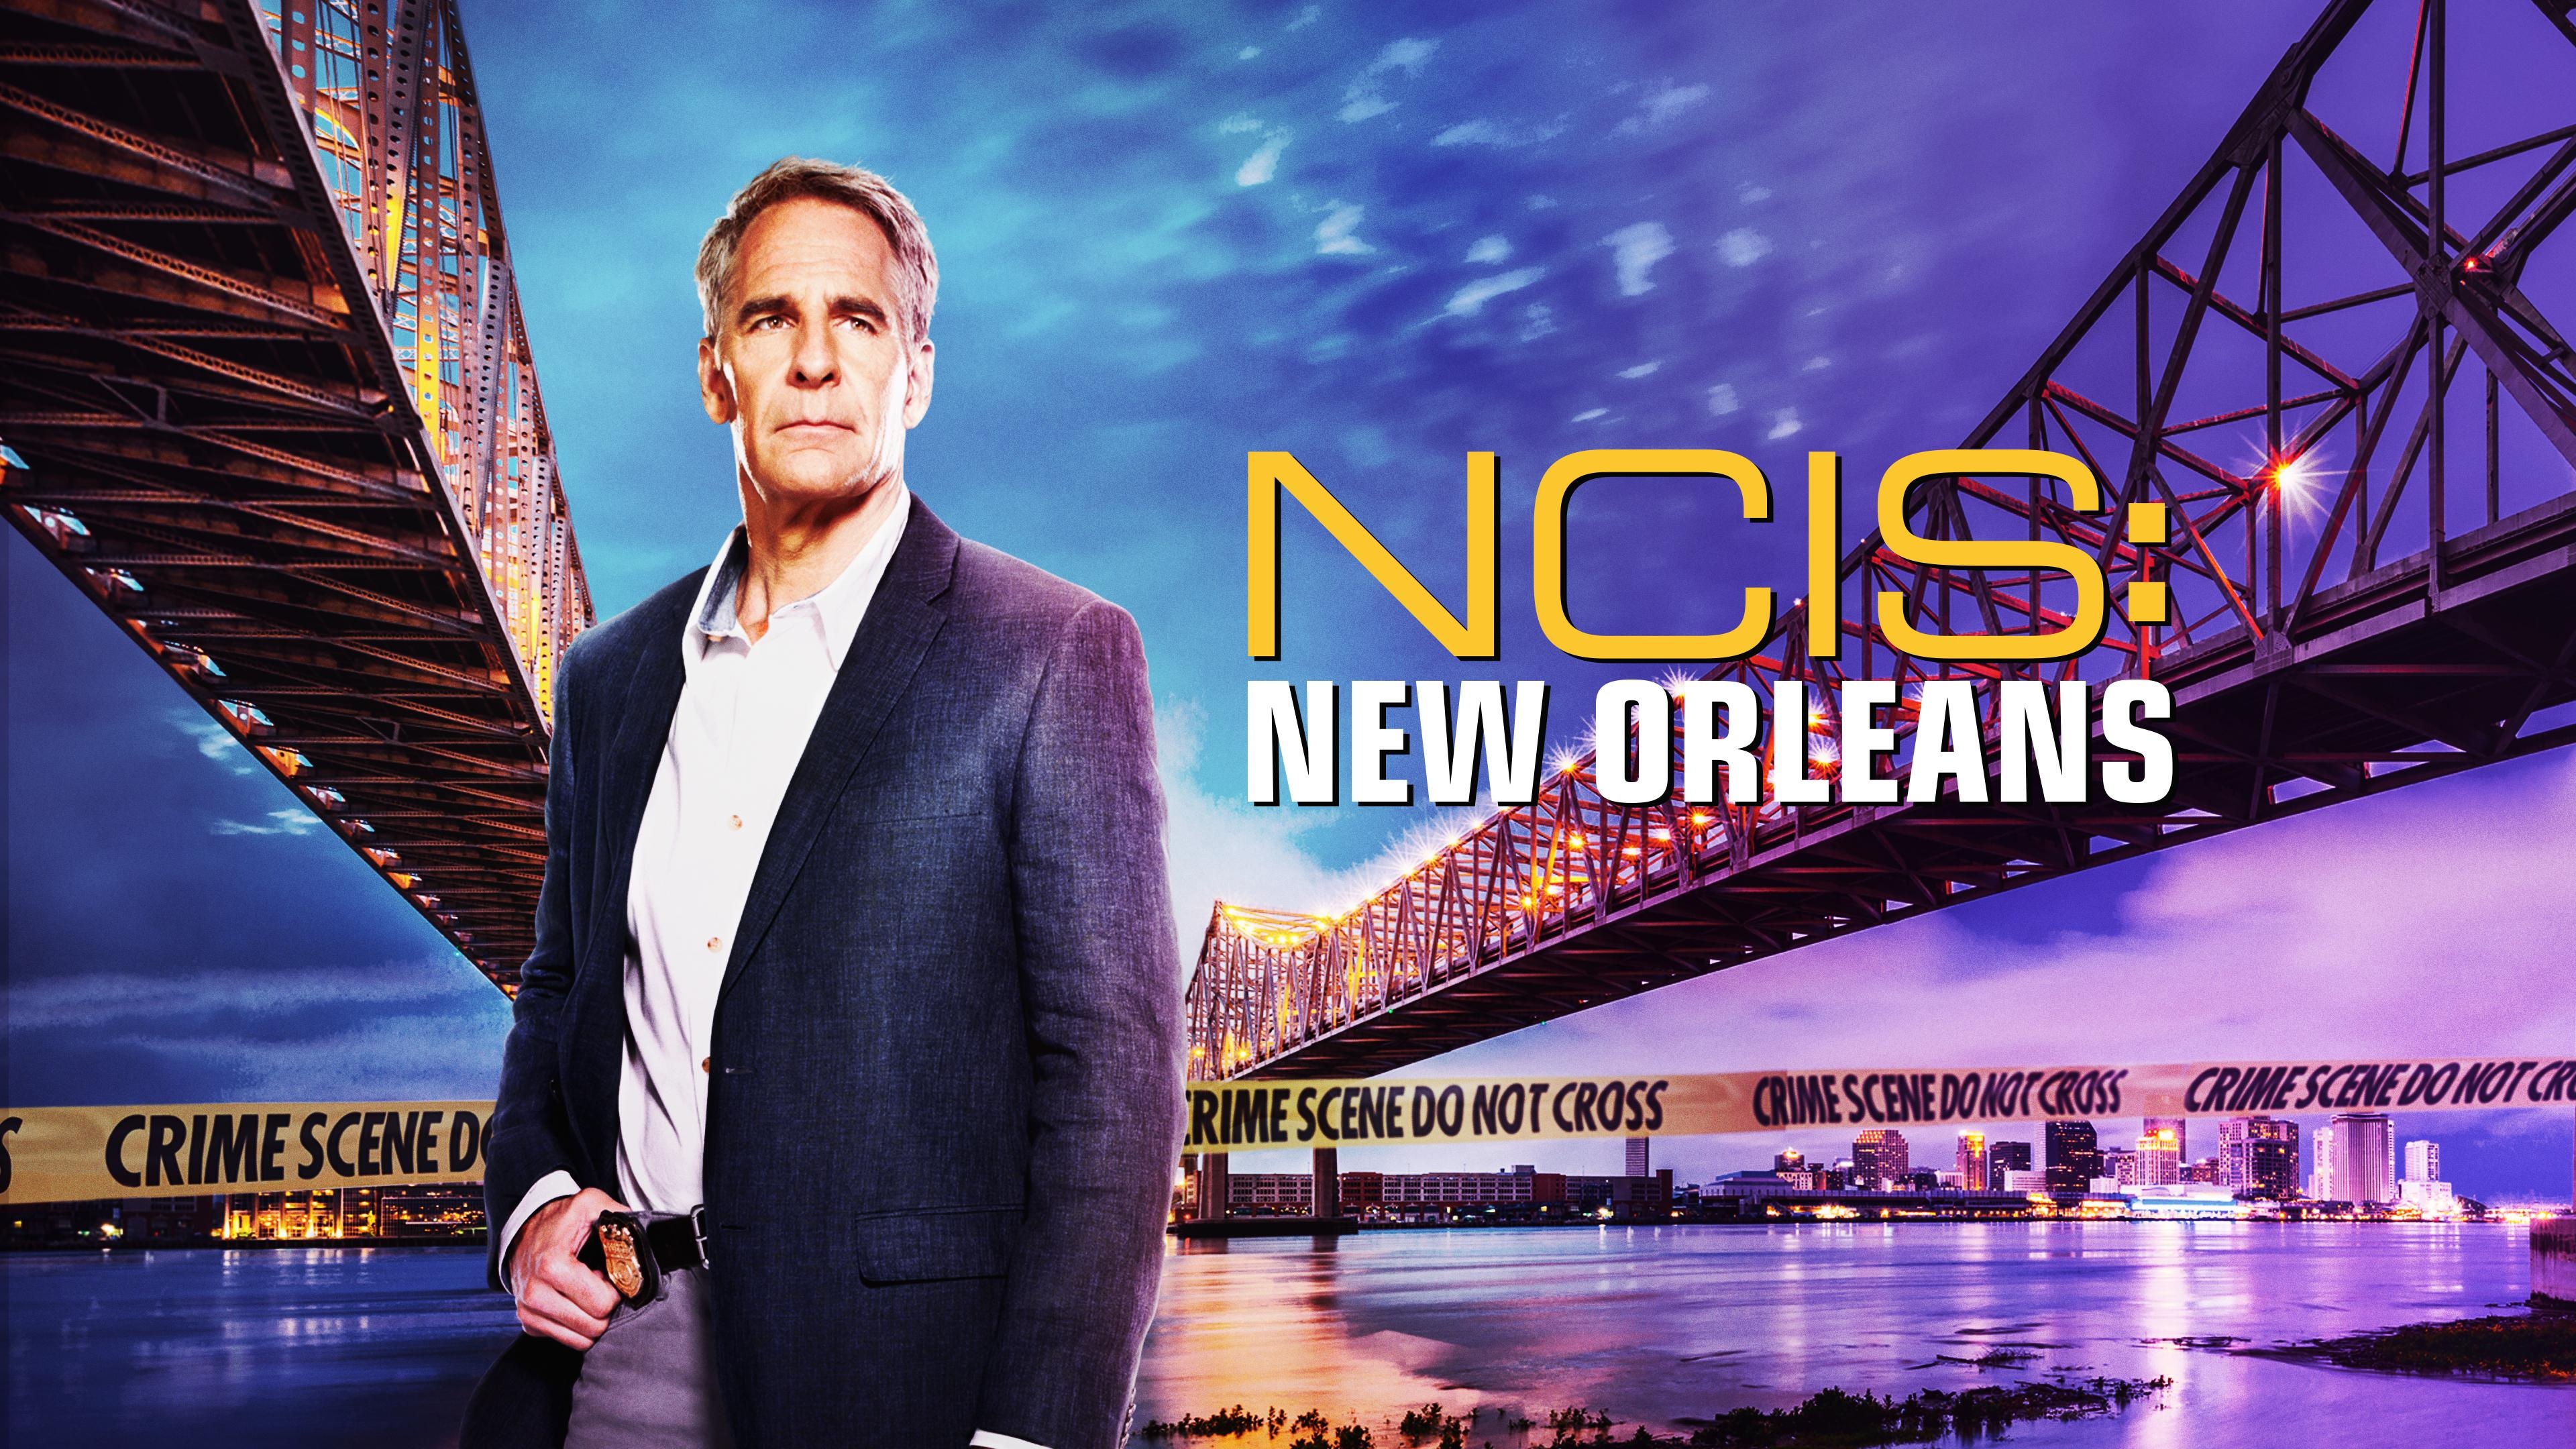 Scott Bakula: An American actor and director, NCIS: New Orleans, An American action crime drama. 3840x2160 4K Background.